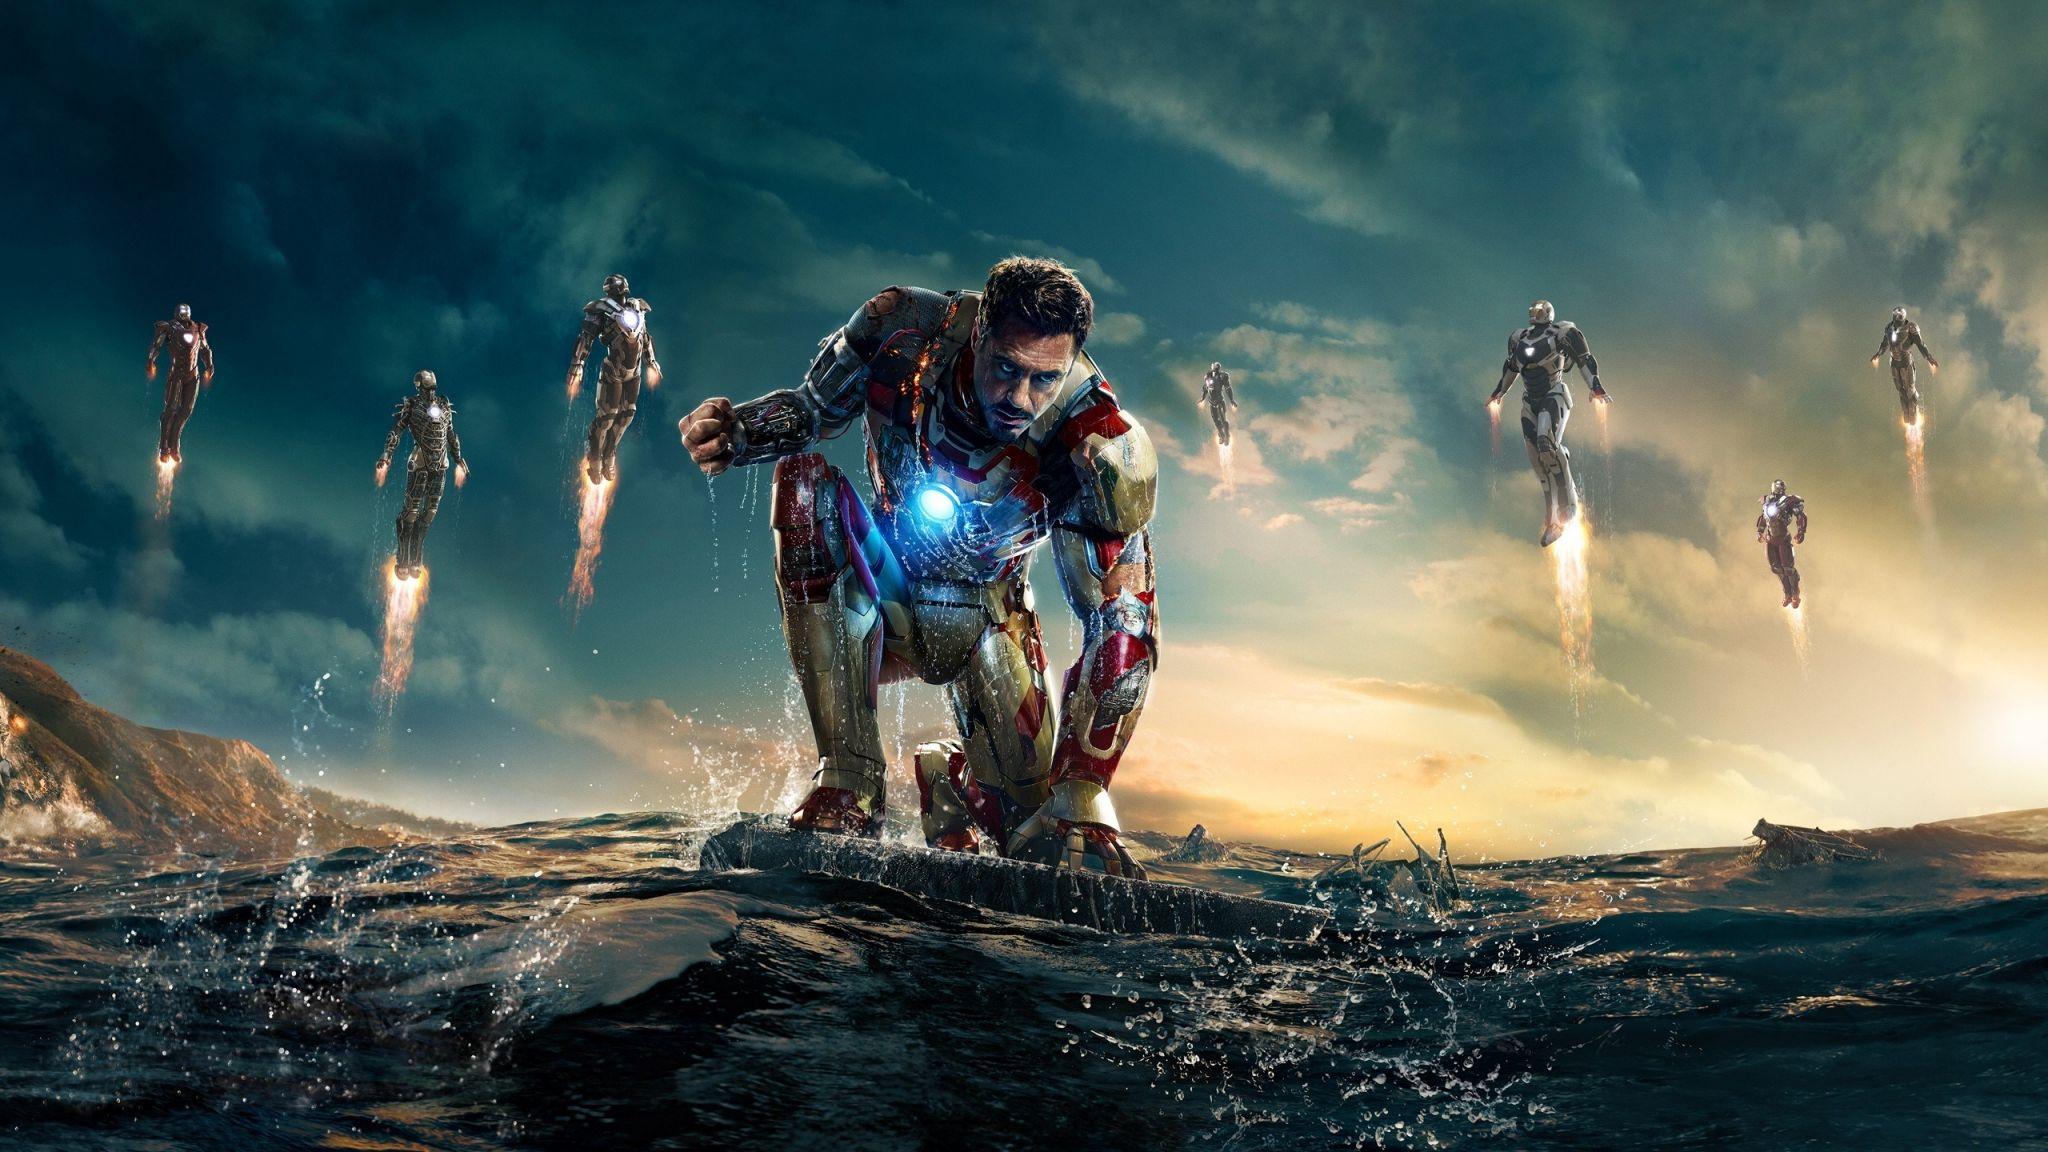 iron man background wallpaper for computer free. Iron man wallpaper, Man wallpaper, Iron man HD wallpaper